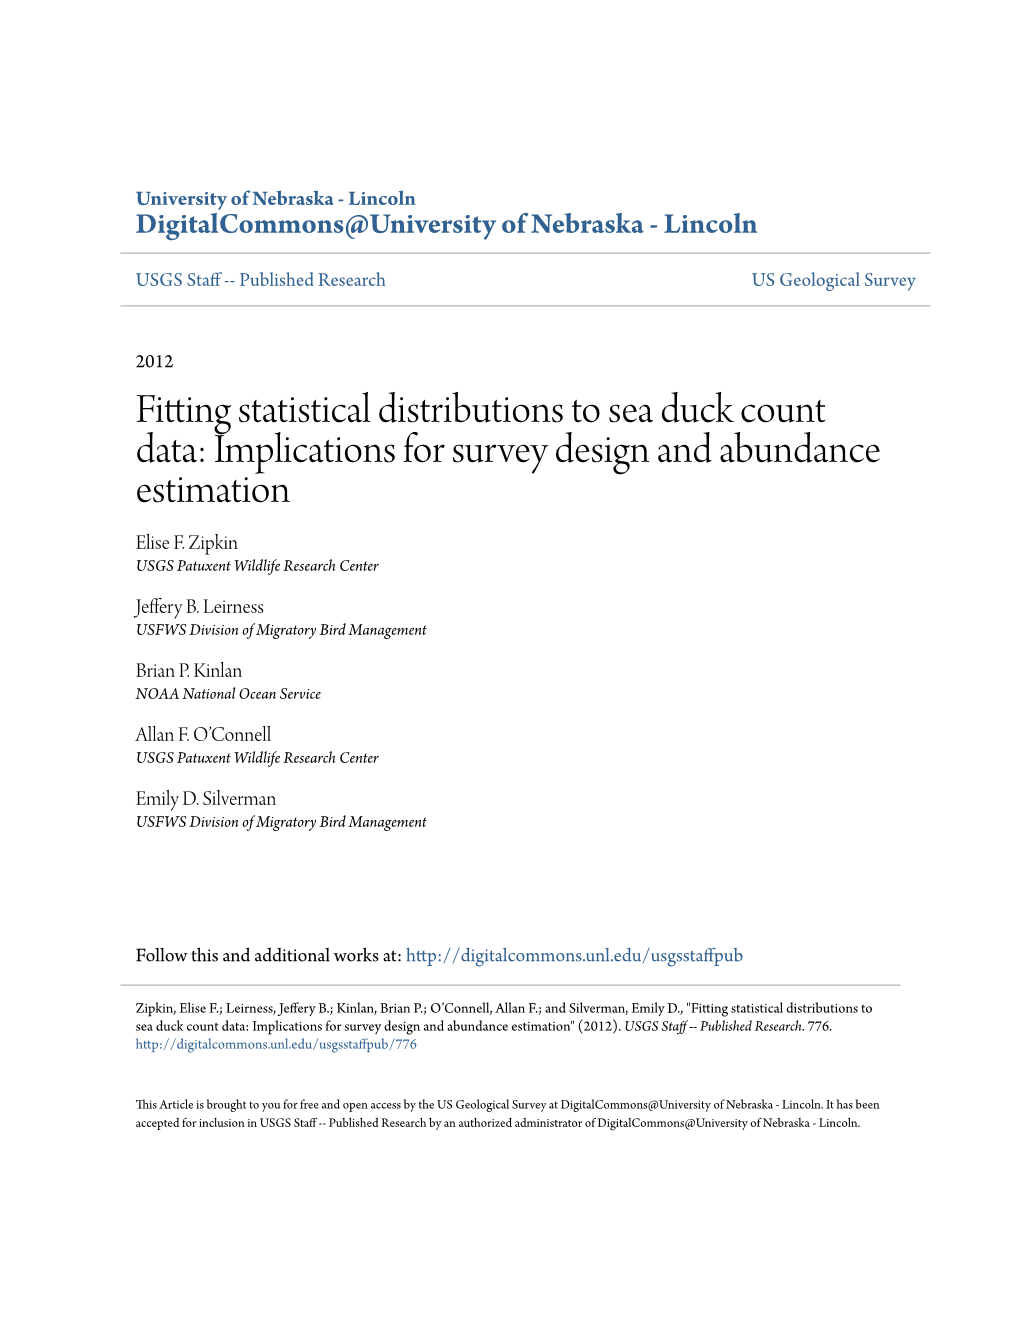 Fitting Statistical Distributions to Sea Duck Count Data: Implications for Survey Design and Abundance Estimation Elise F